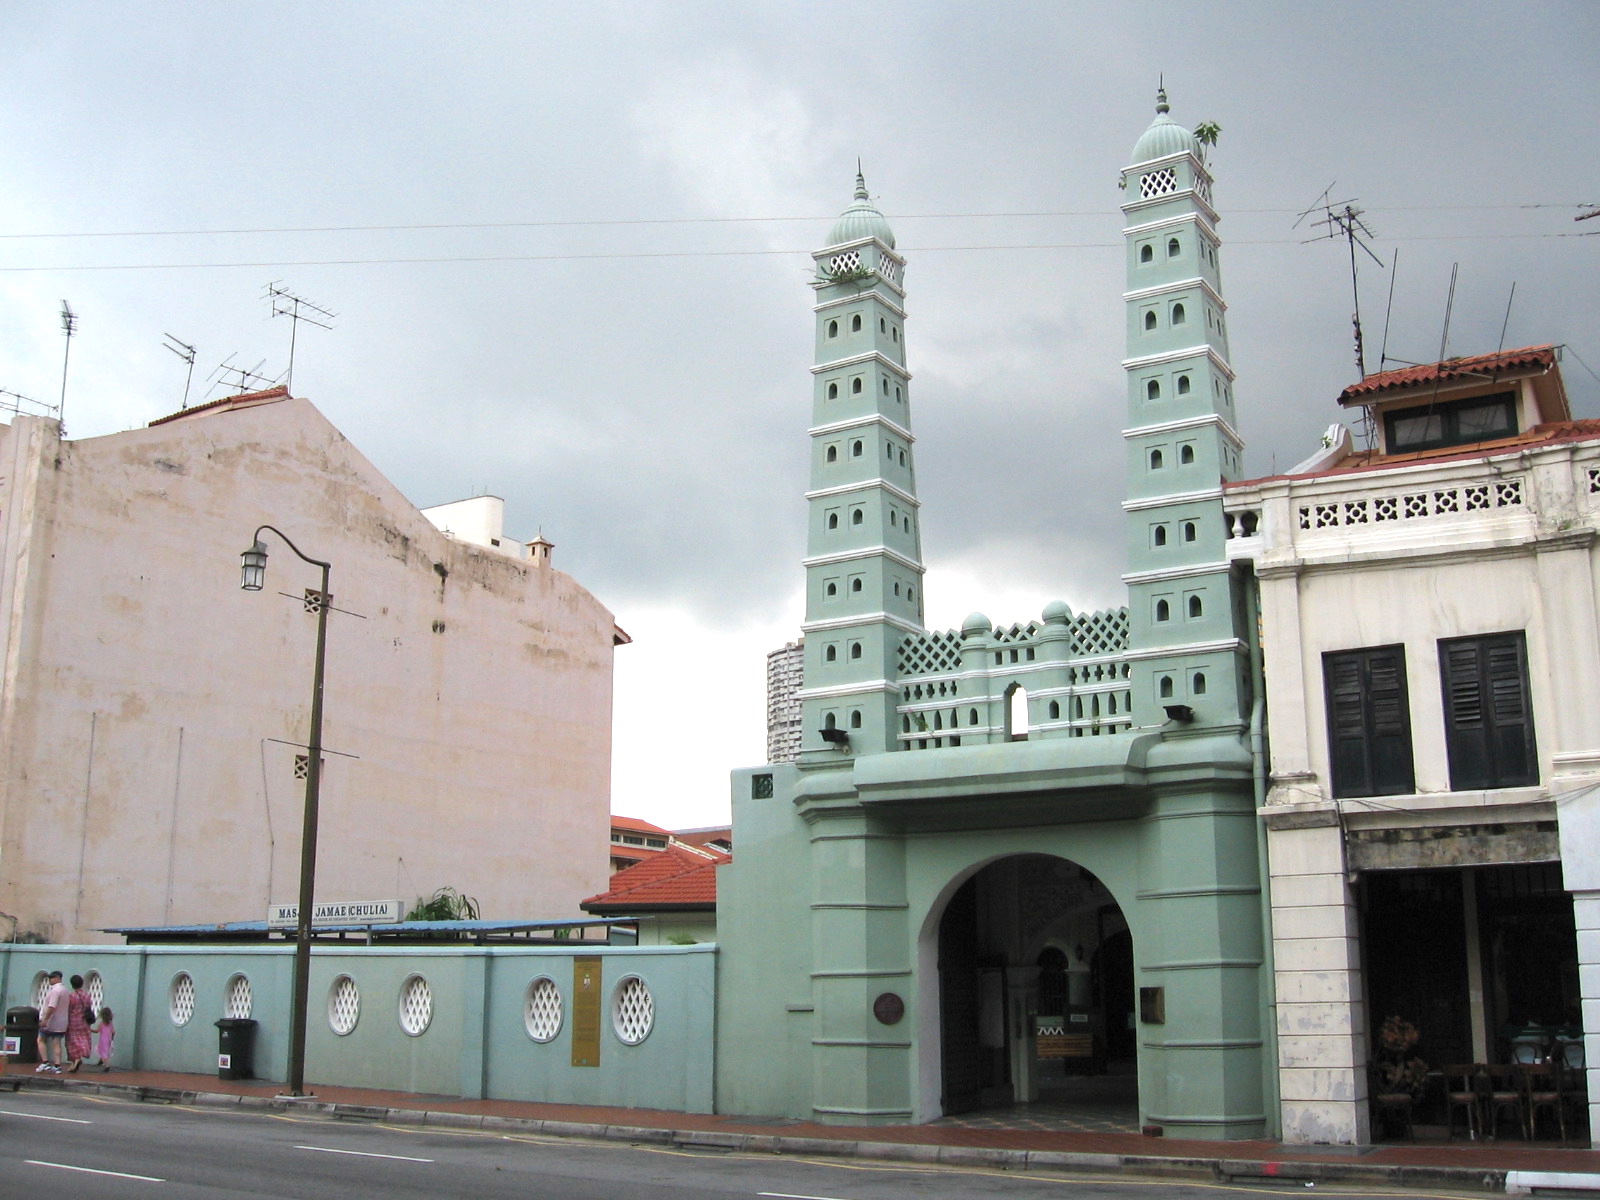 Masjid Jamae, where Nalla Mohamed Abdul Jameel had been chief imam for the past seven years. Photo: Wikimedia Commons